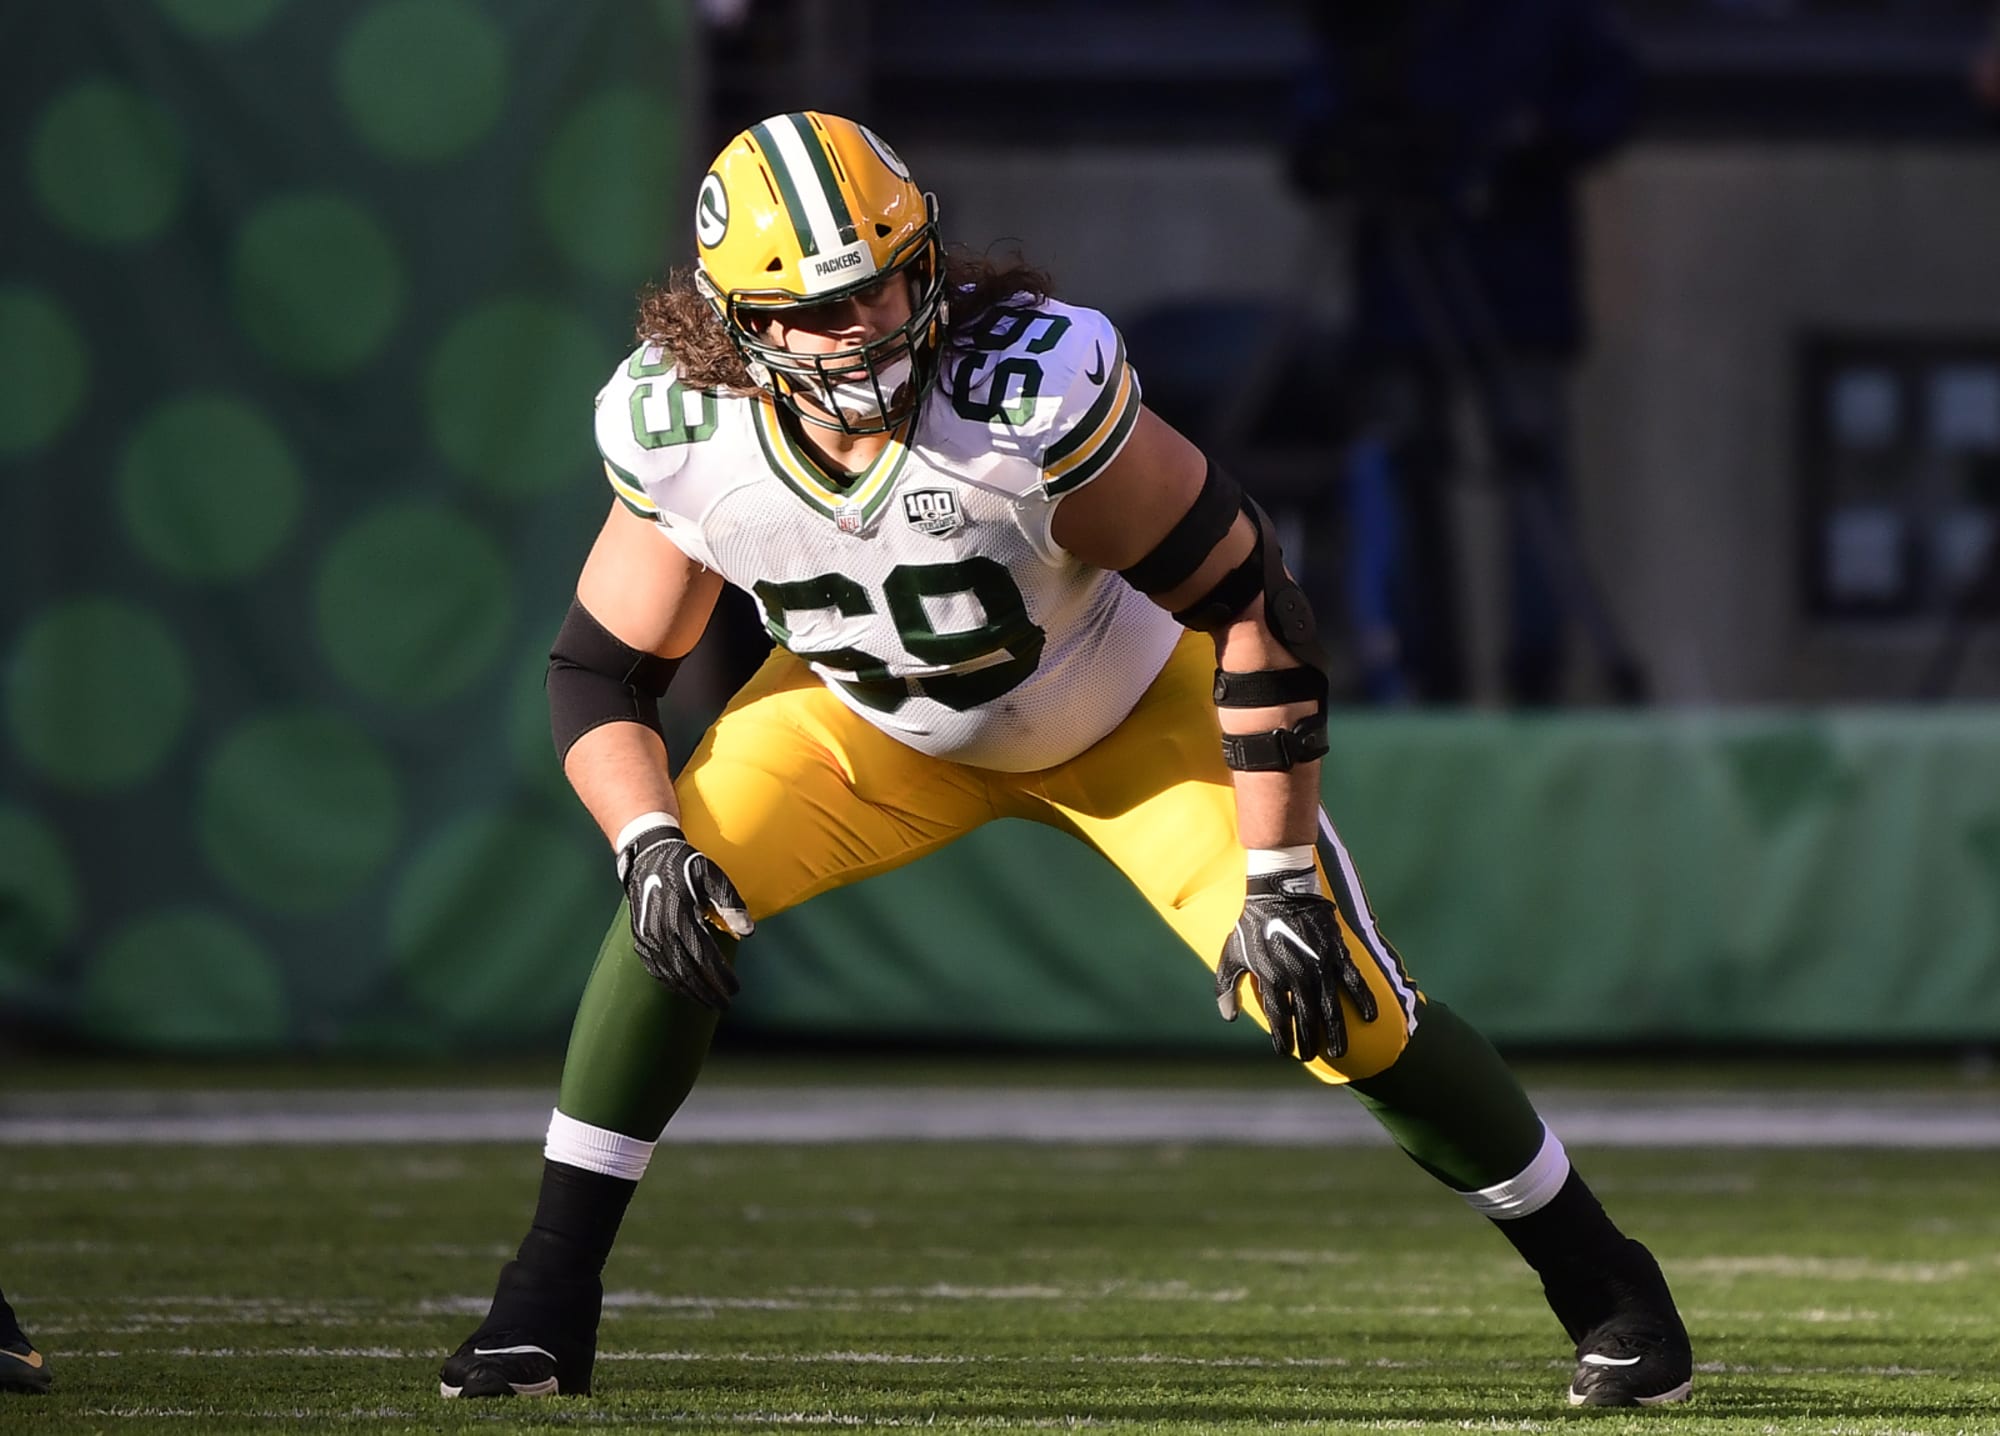 David Bakhtiari and Packers Reportedly 